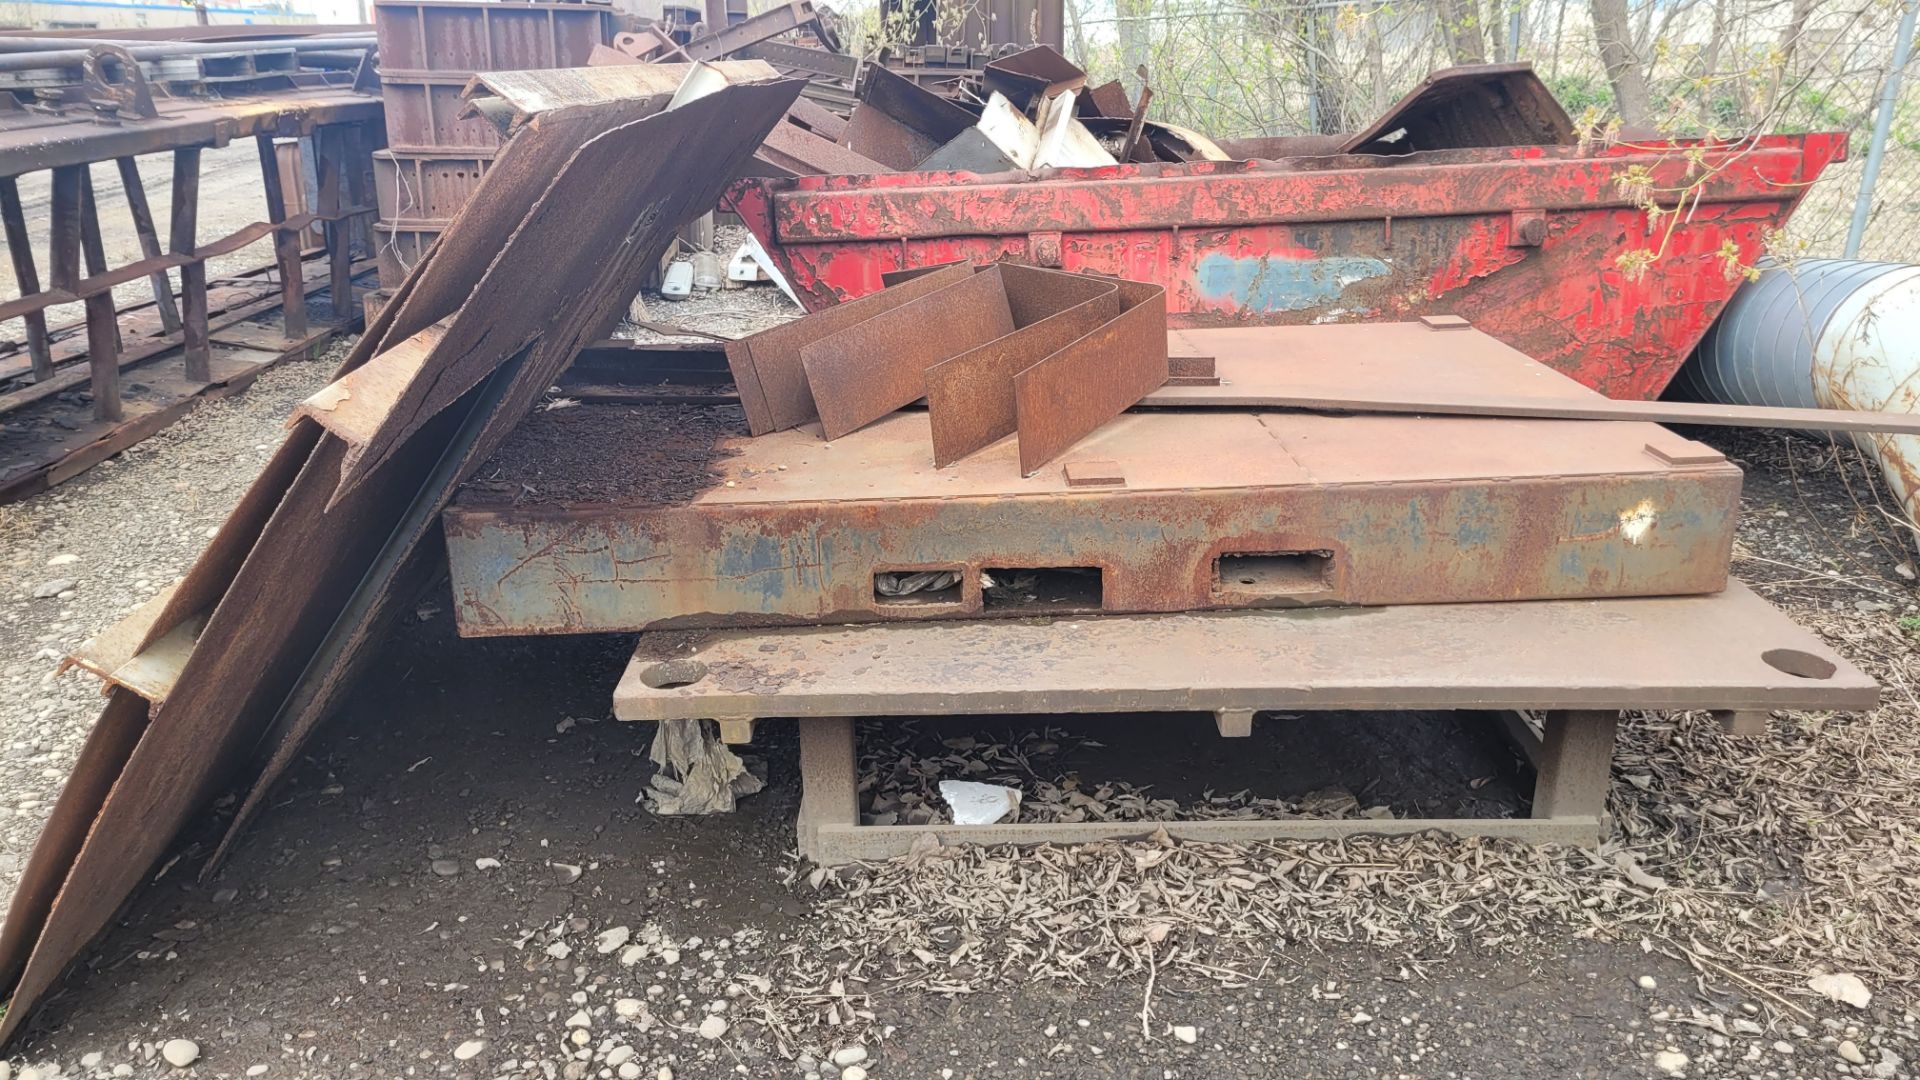 LOT - LARGE ASSORTMENT OF STEEL MOULD BOXES, BASKETS, PIPES, RODS, RACKS, LADELS, WALKWAYS, FLATS, - Image 22 of 34